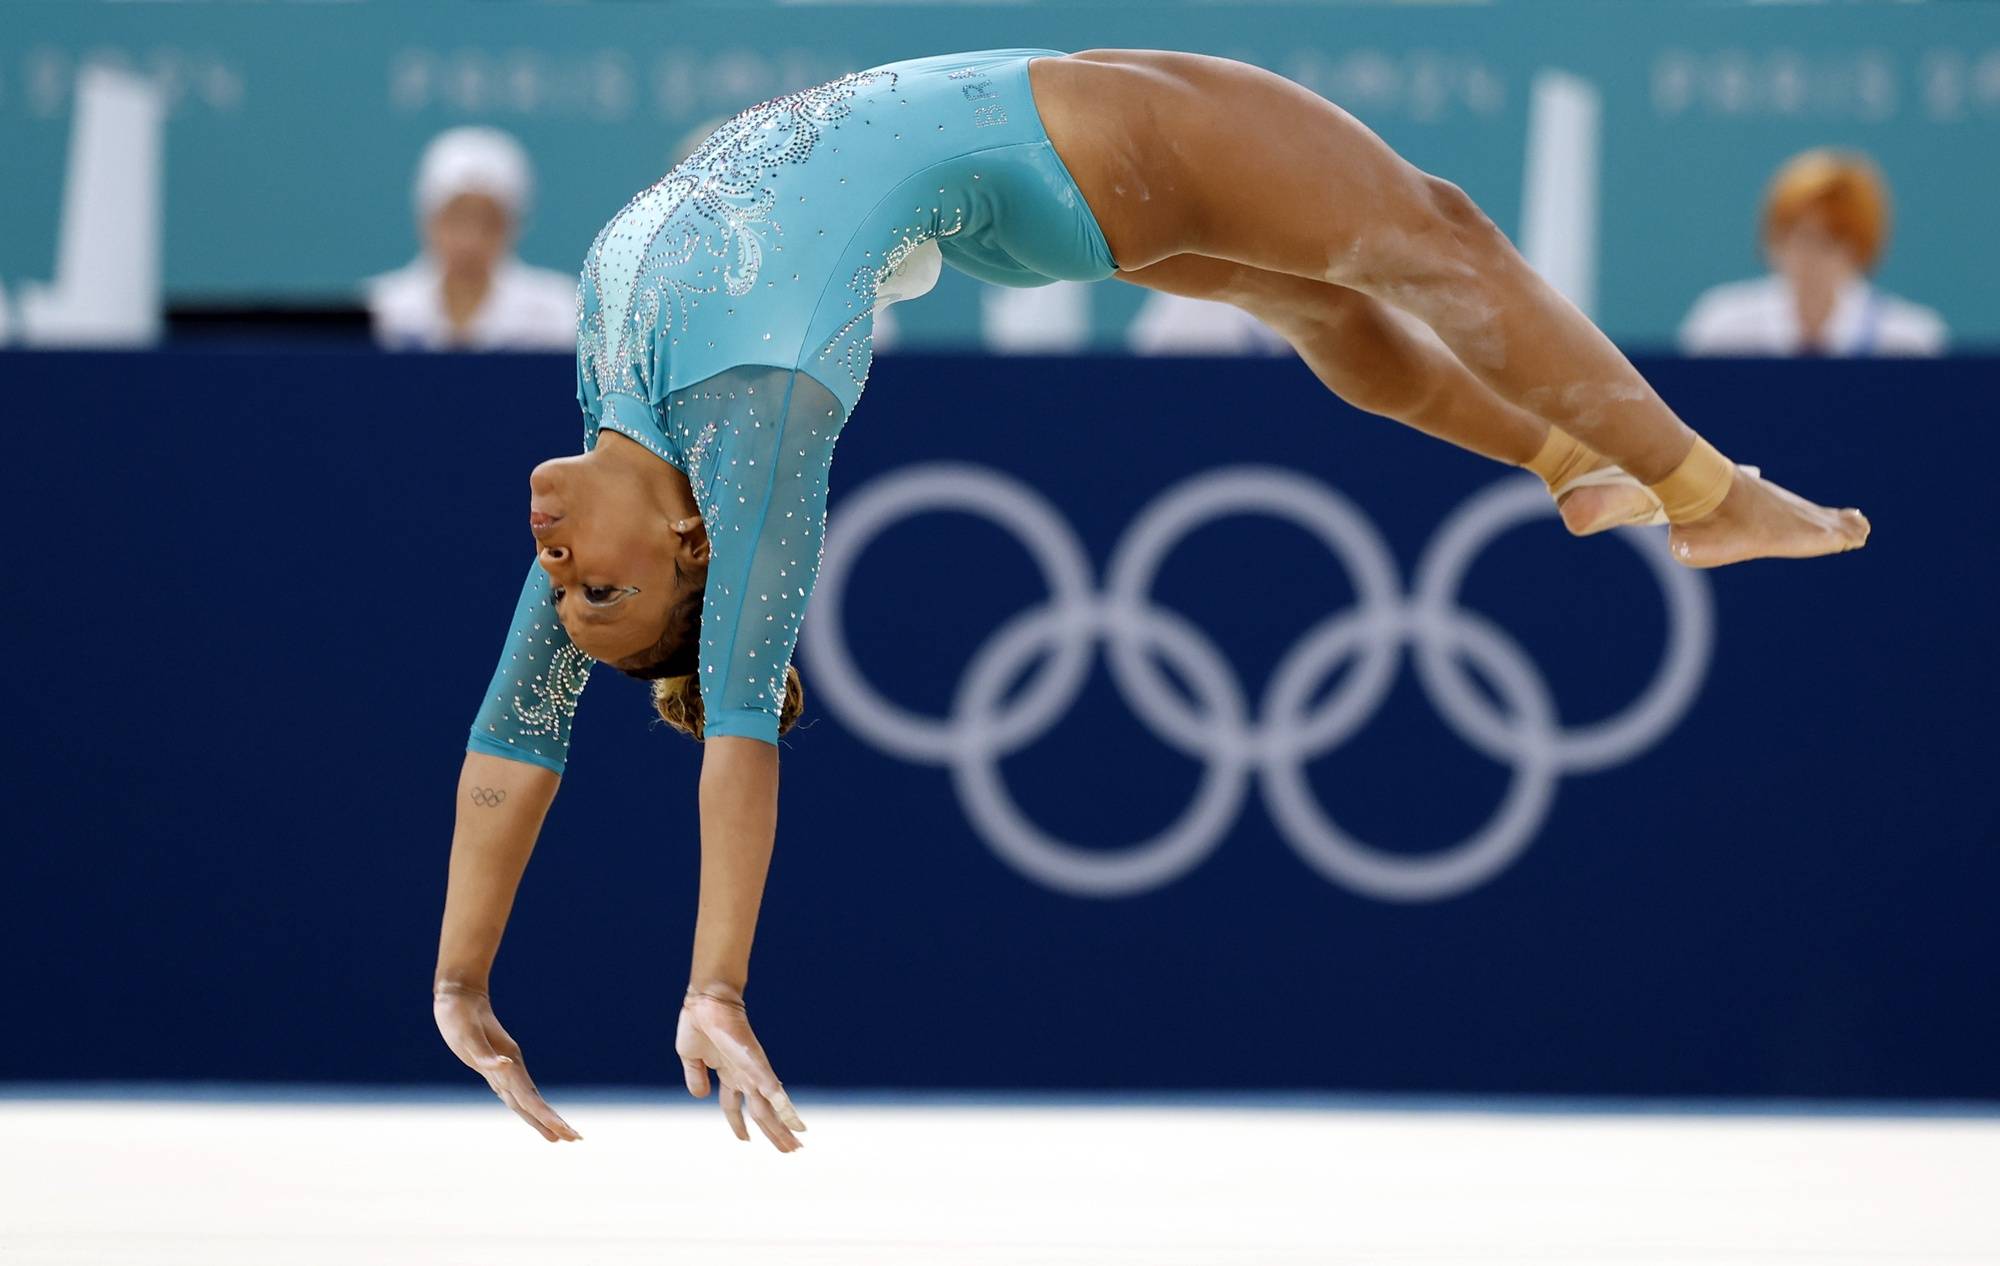 epa11527490 Rebeca Andrade of Brazil competes in the Women Floor Exercise final of the Artistic Gymnastics competitions in the Paris 2024 Olympic Games, at the Bercy Arena in Paris, France, 05 August 2024.  EPA/CAROLINE BREHMAN